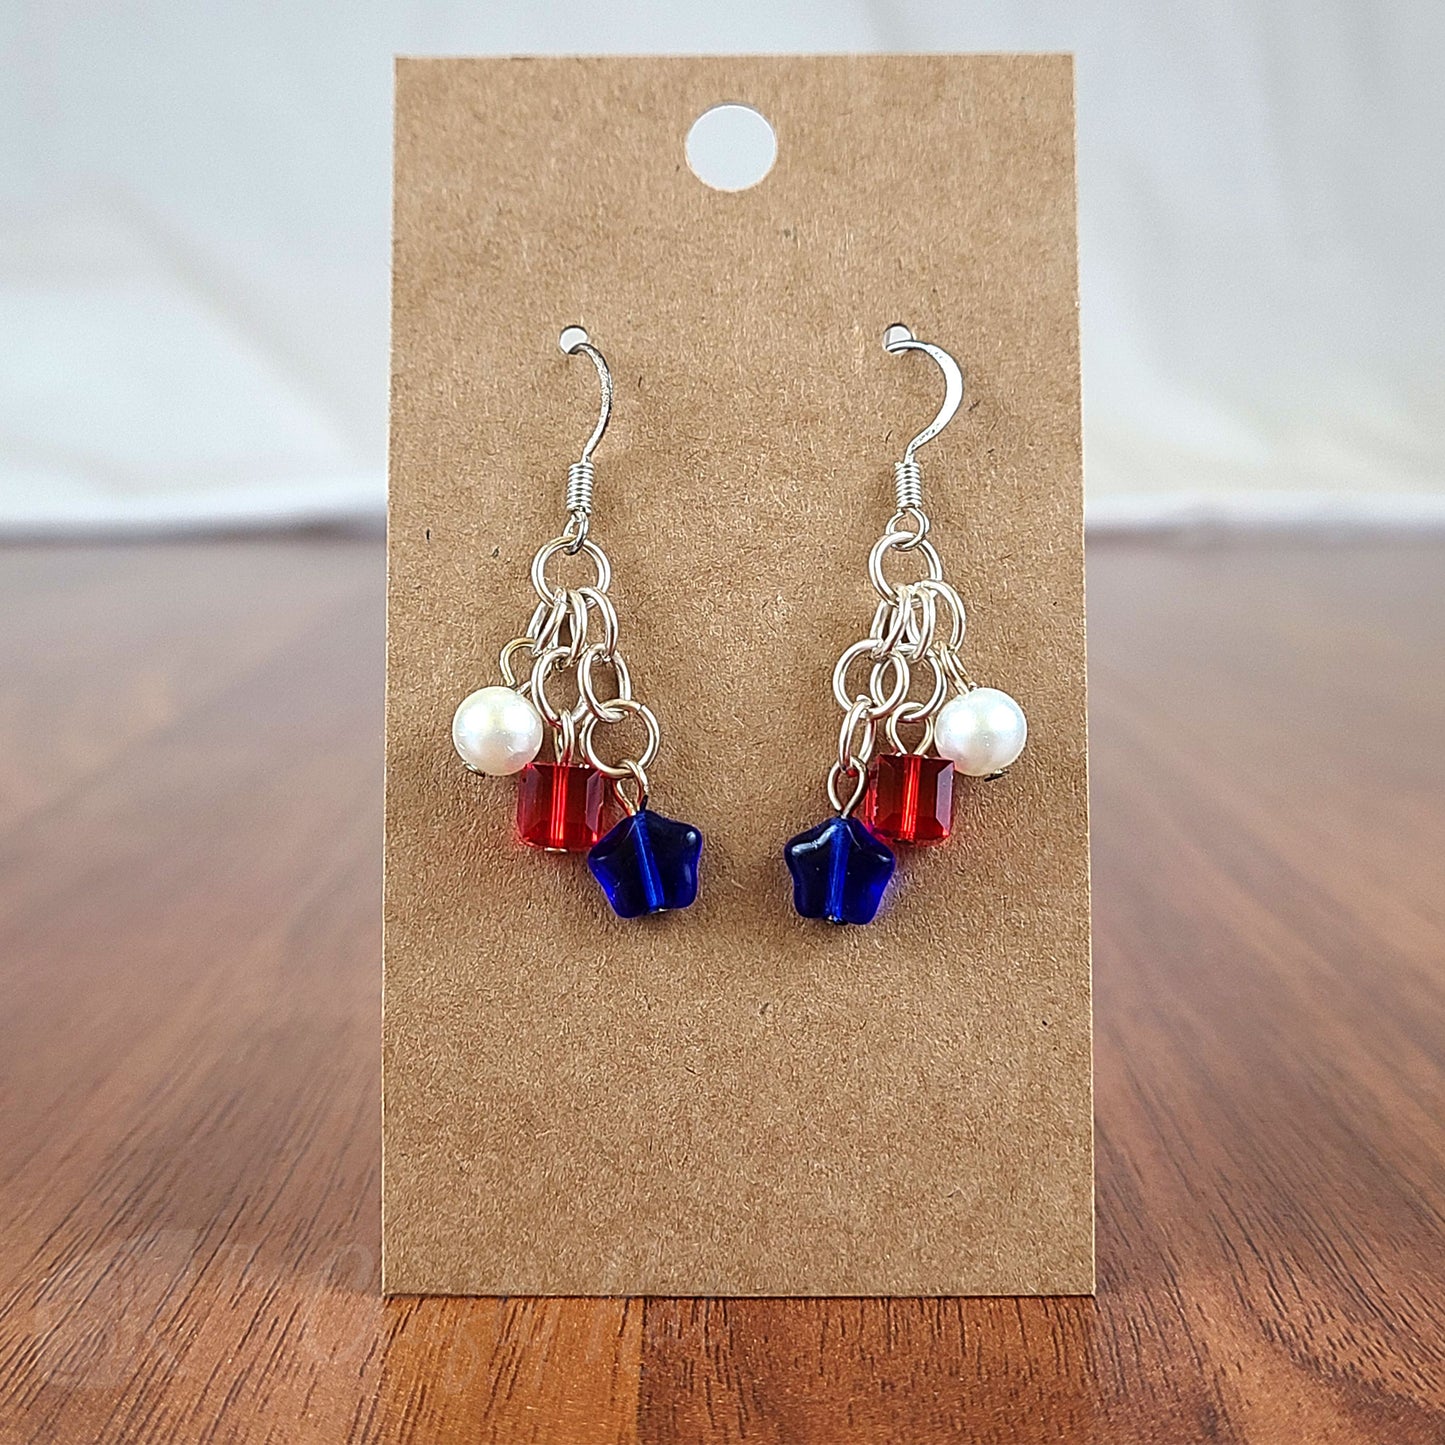 Chandelier earrings featuring blue pressed glass stars, red facet-cut crystal cubes, and white glass pearls with silver fittings